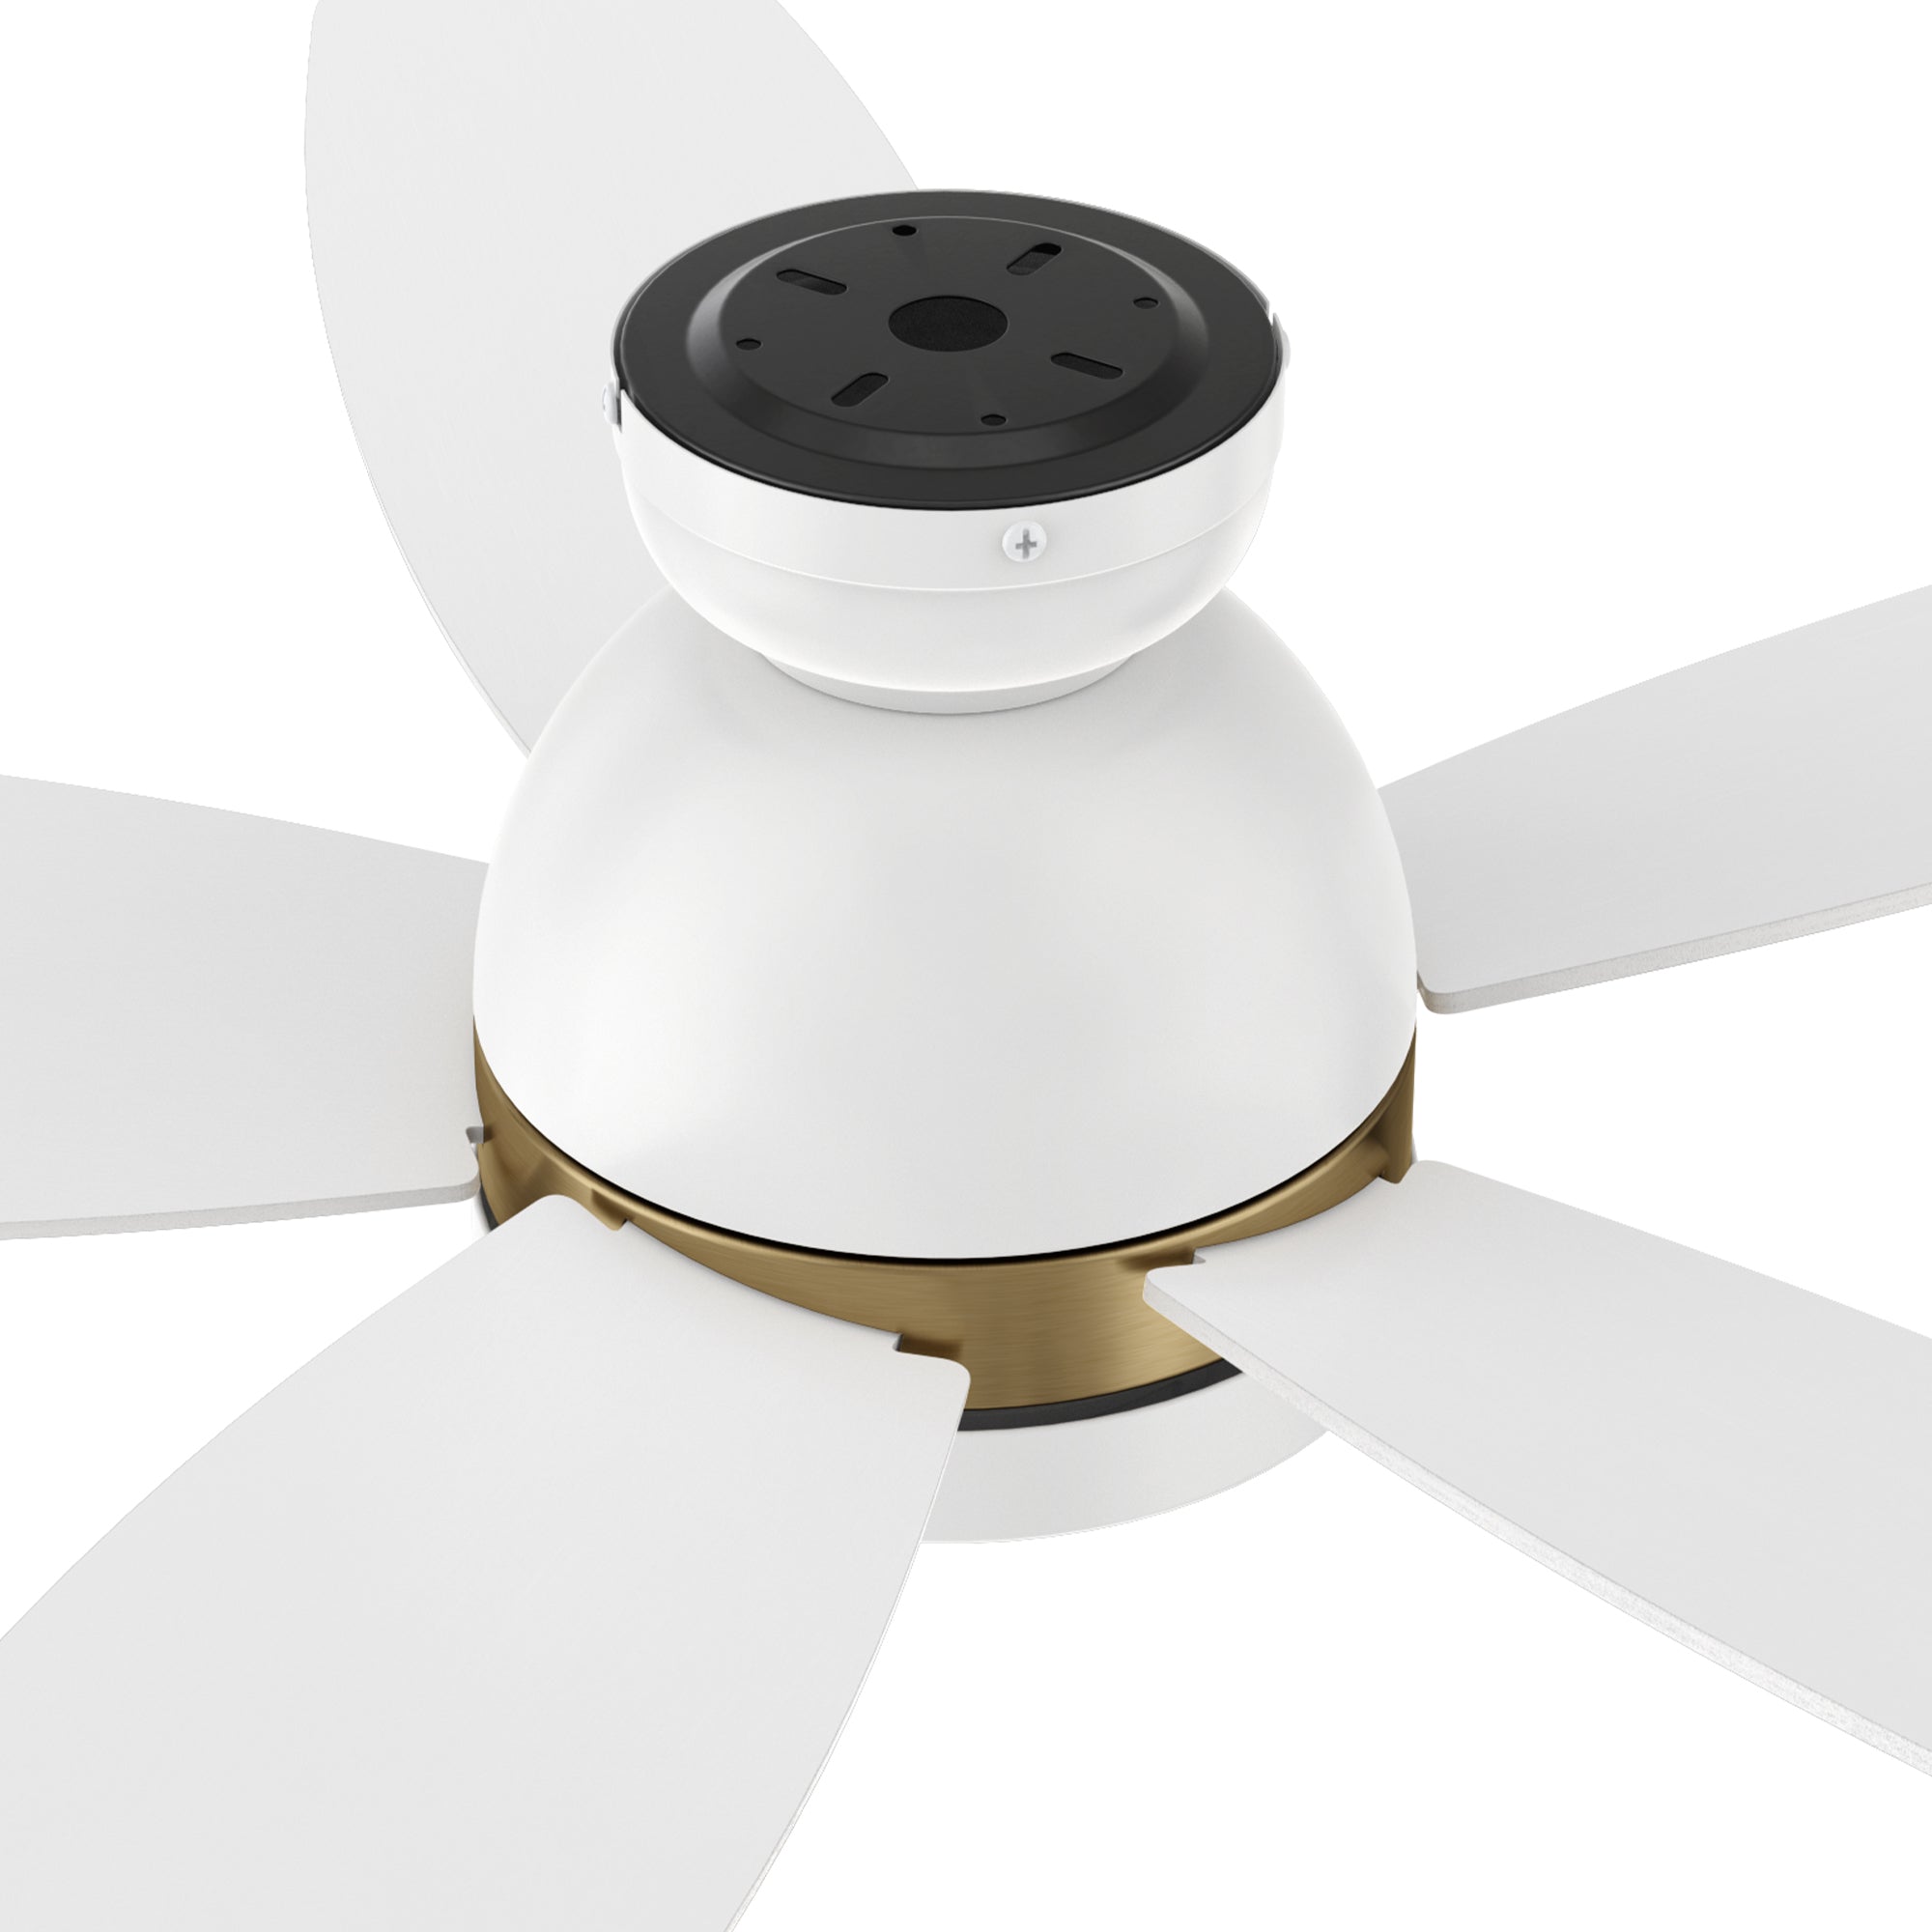 This Povjeta 48 inch ceiling fan keeps your space cool, bright, and stylish. It is a modern masterpiece perfect for your indoor living spaces. This ceiling fan features a sleek Black finish, elegant Plywood blades, and an integrated 4000K LED cool light. The fan also comes with a Remote control to set fan preferences. #color_White